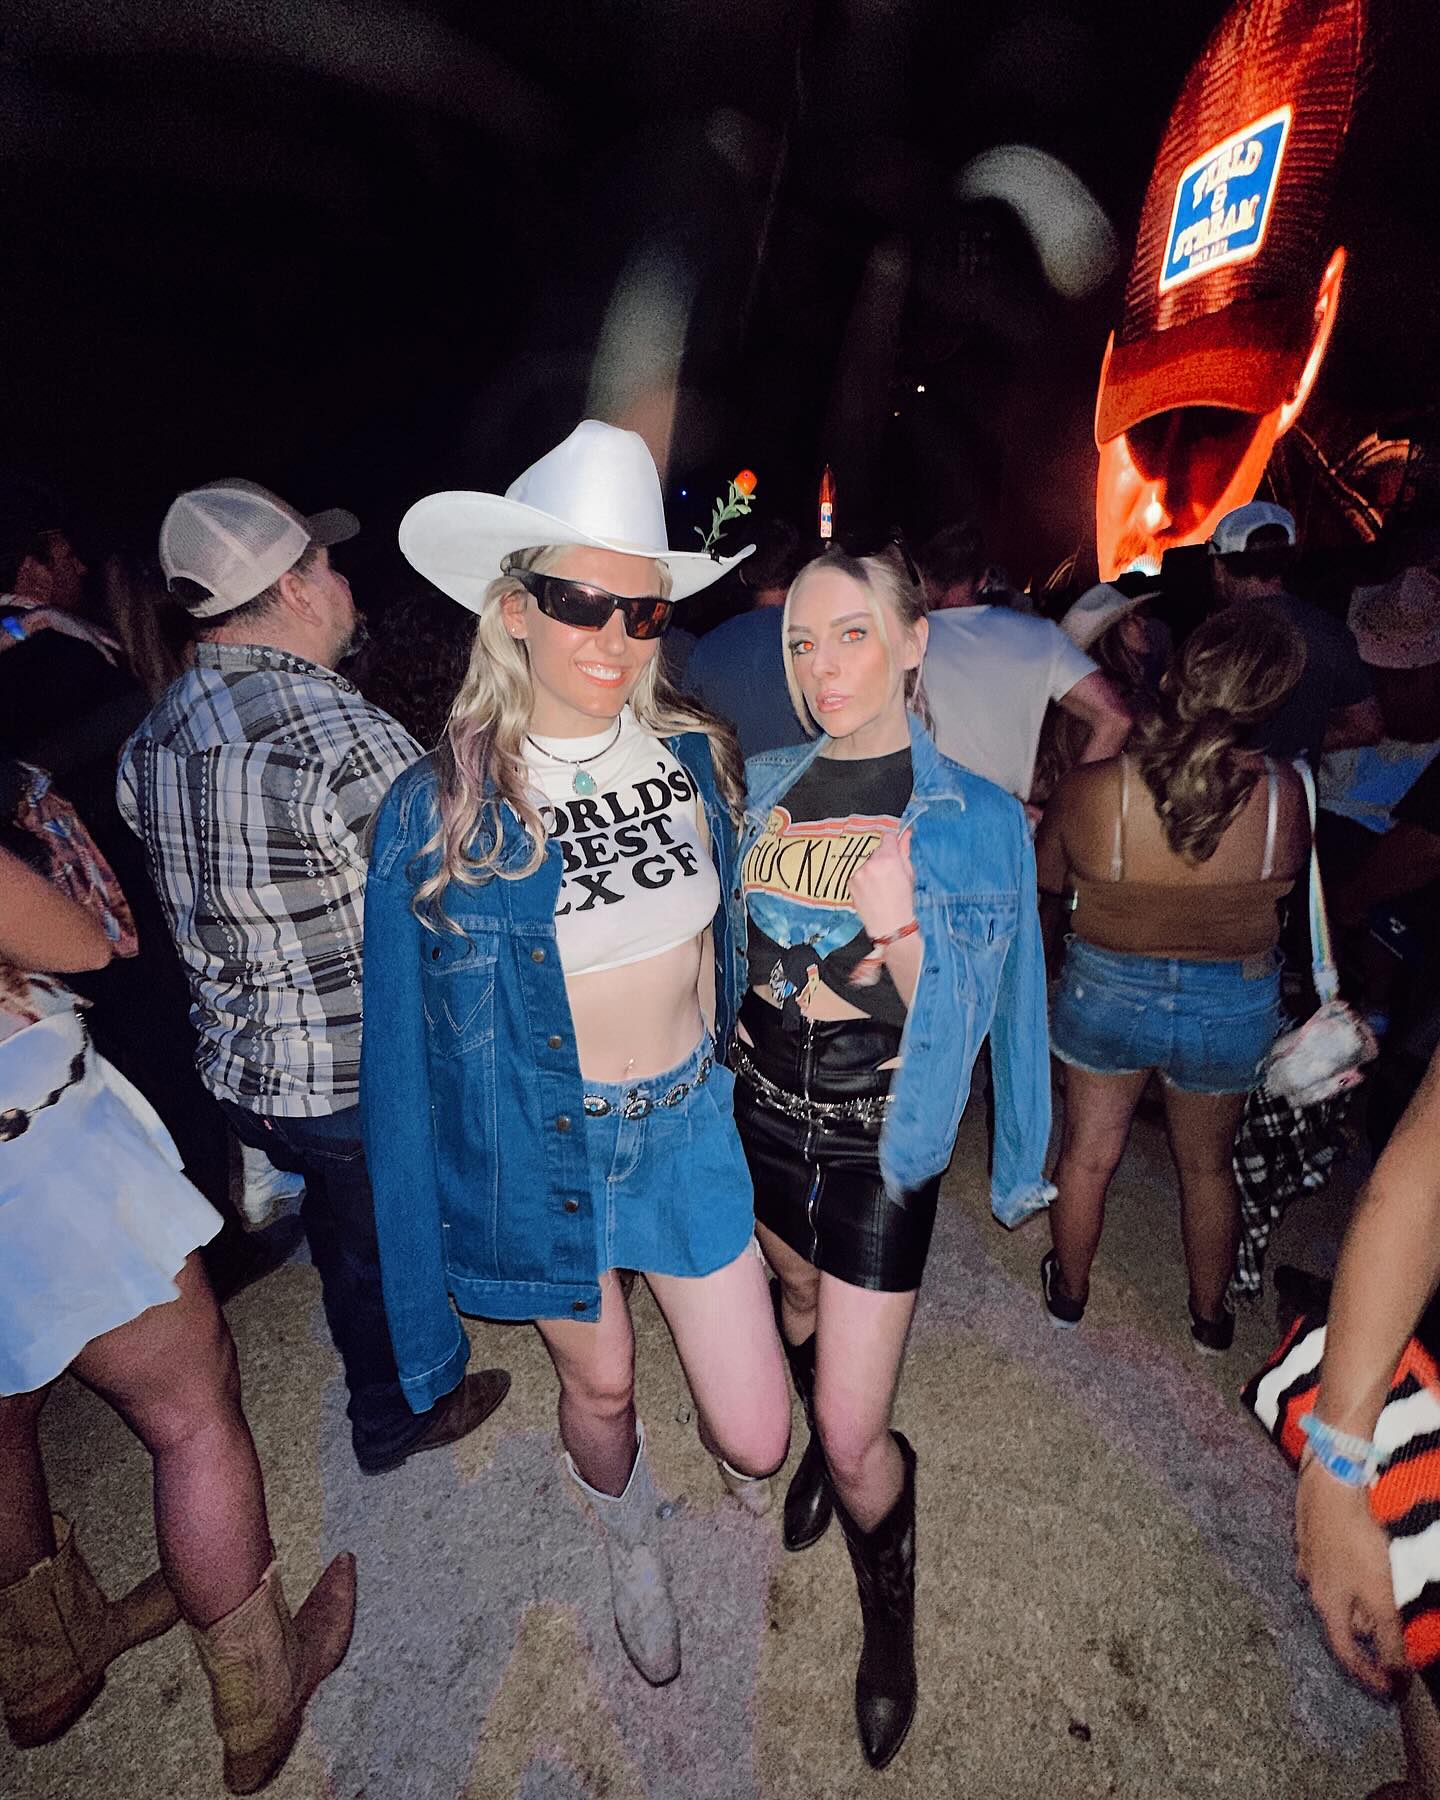 I need something you proof🤠 unforgettable night experiencing my first time ever at @stagecoach w artist bands😭❤️‍🔥🎶 forever grateful for the mems. (p.s. - thanks for going w me twin @kaylacmarie 👯‍♀️)